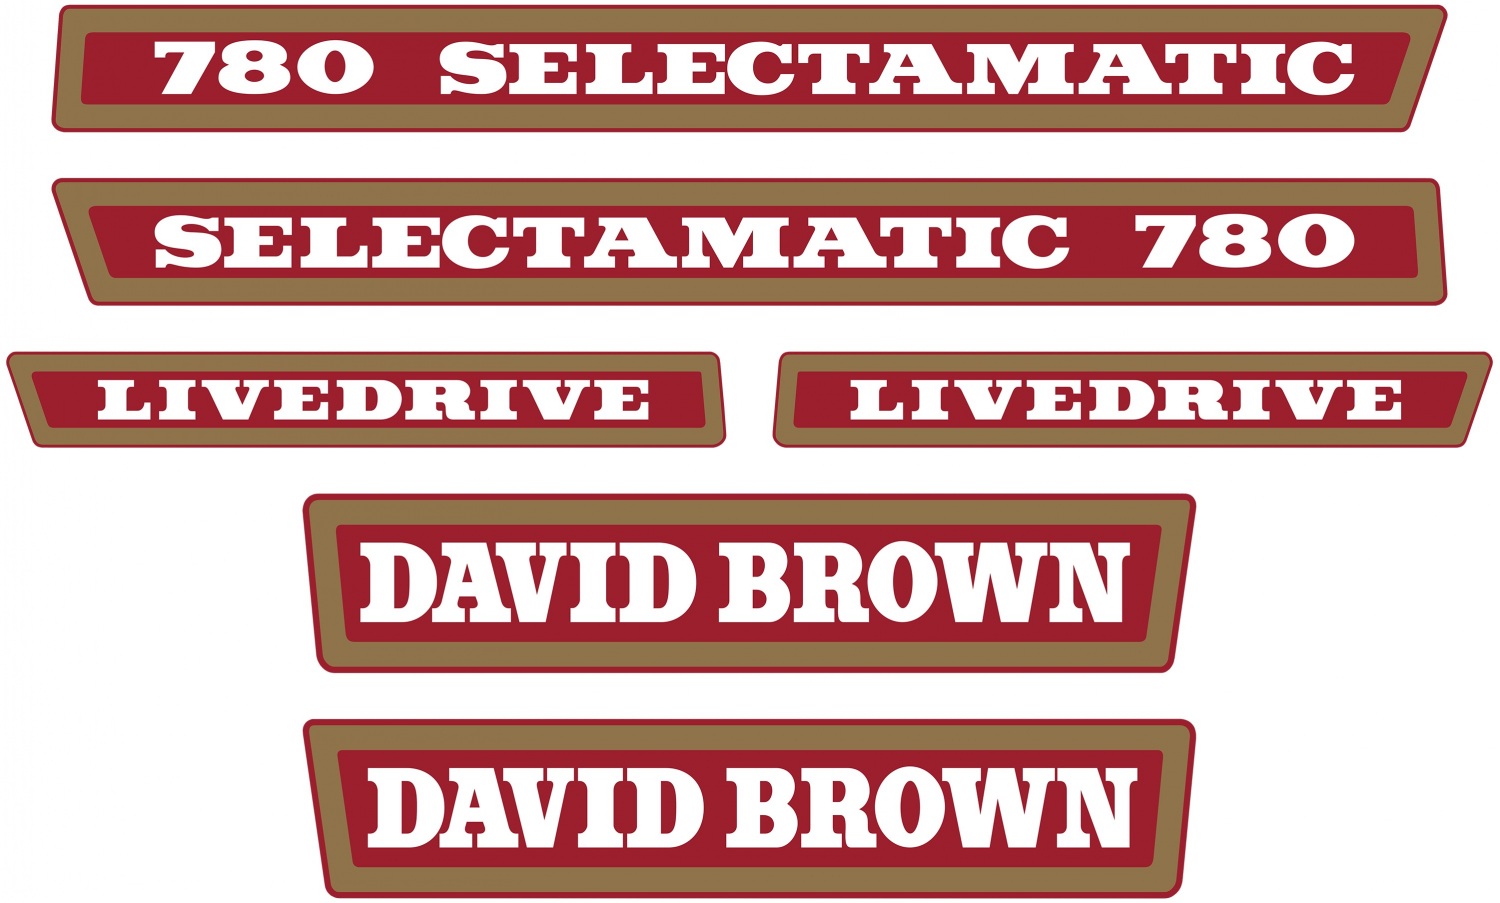 decals David brown 780 selectamatic livedrive tractor  stickers 